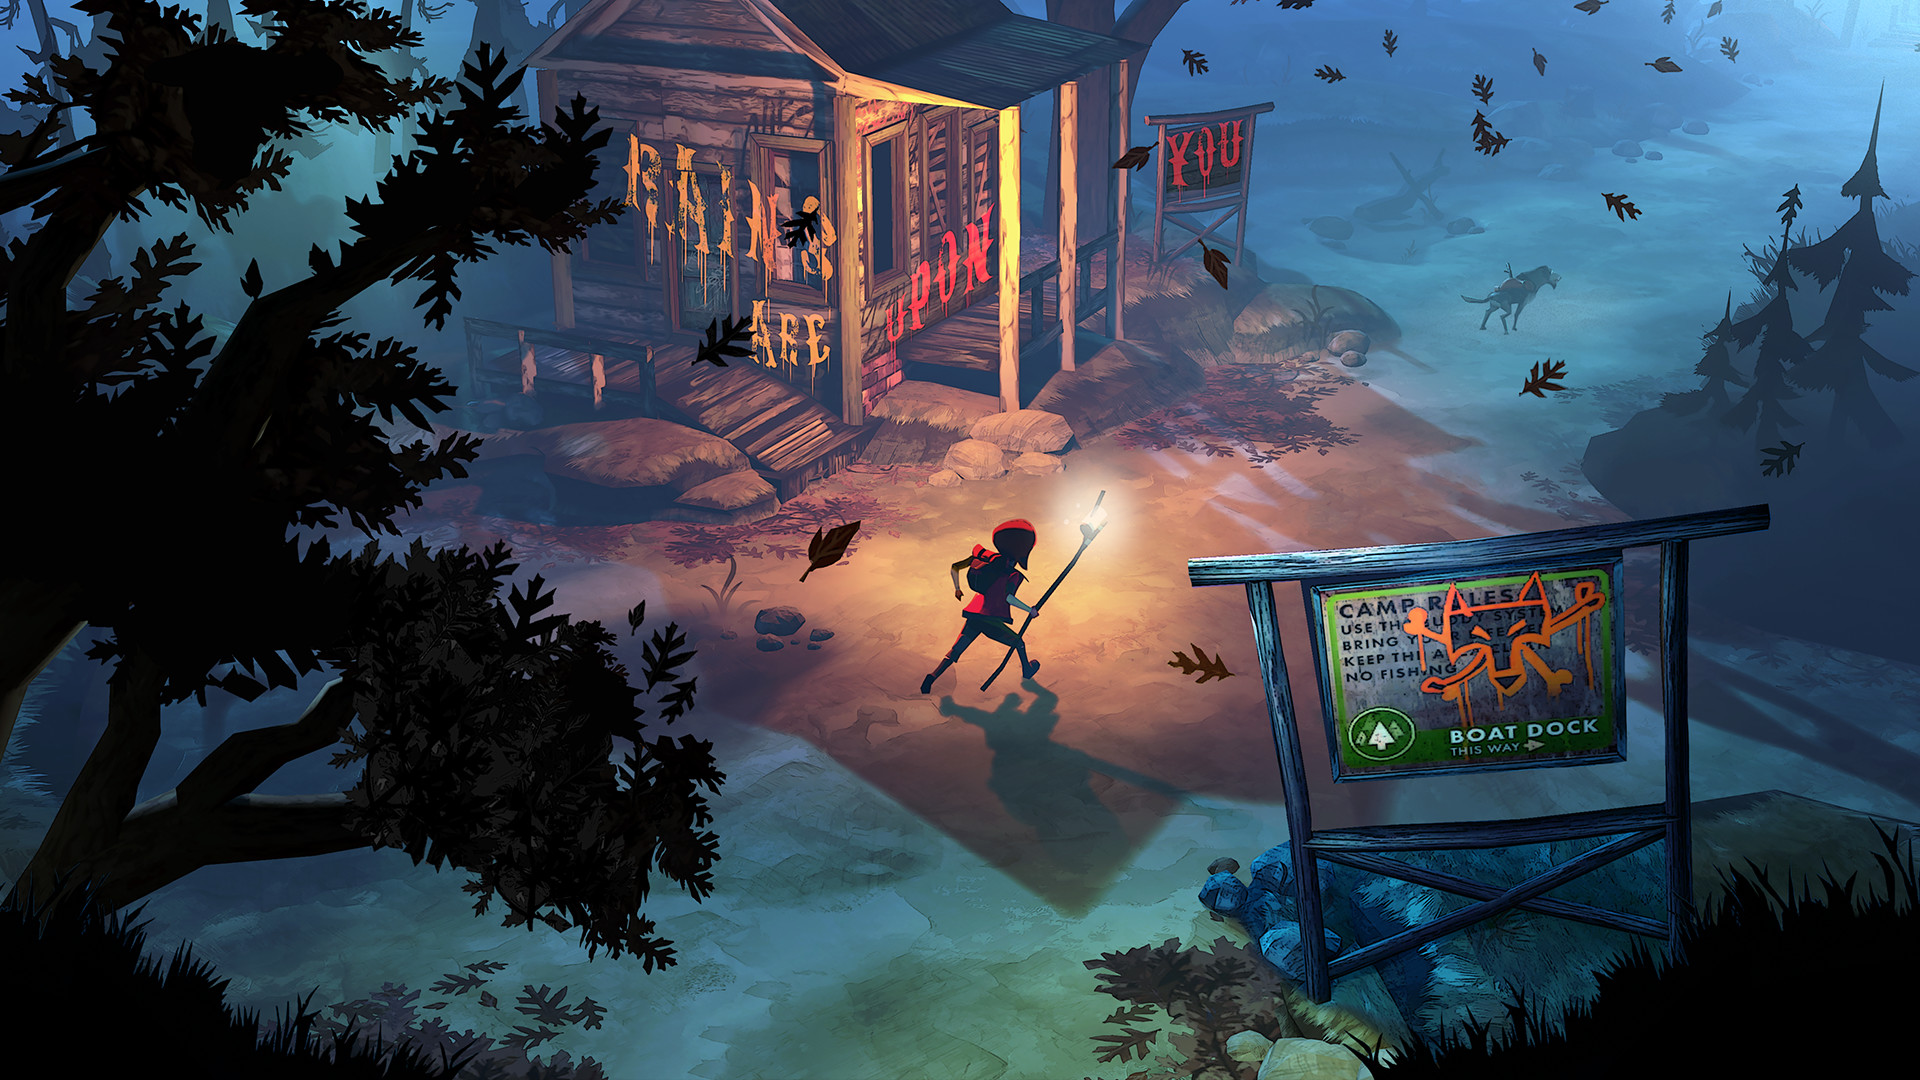 This week’s Deals with Gold feature The Flame in the Flood and Styx: Master of Shadows